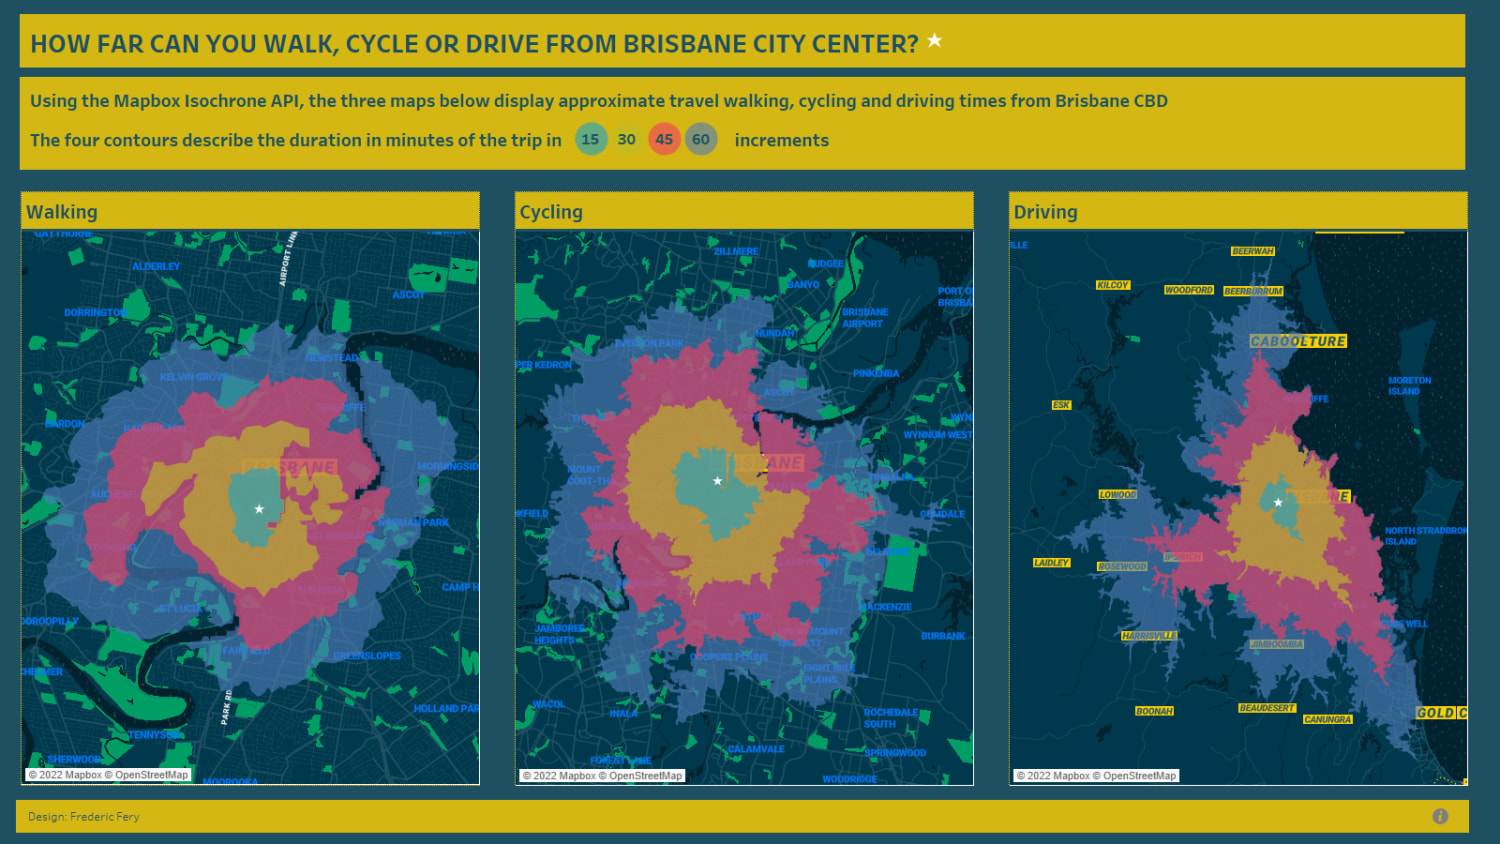 Illustration of the walking, cycling and driving times from Brisbane’s Central Business District, Australia - Travel time Analysis using Mapbox Isochrone API